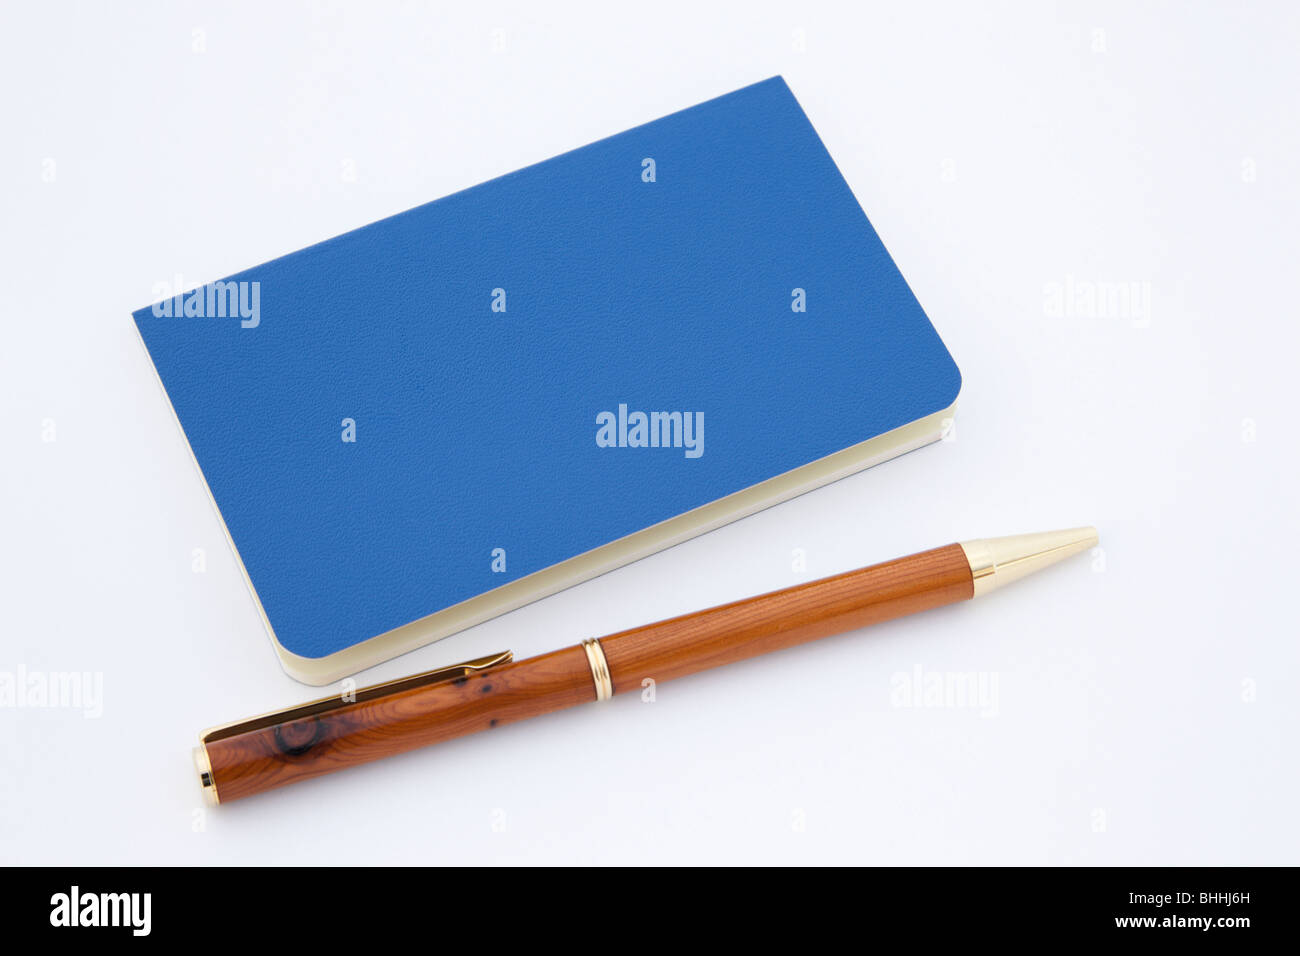 Close-up of a blue moleskine notebook with a wooden ballpoint pen on a white background. Stock Photo